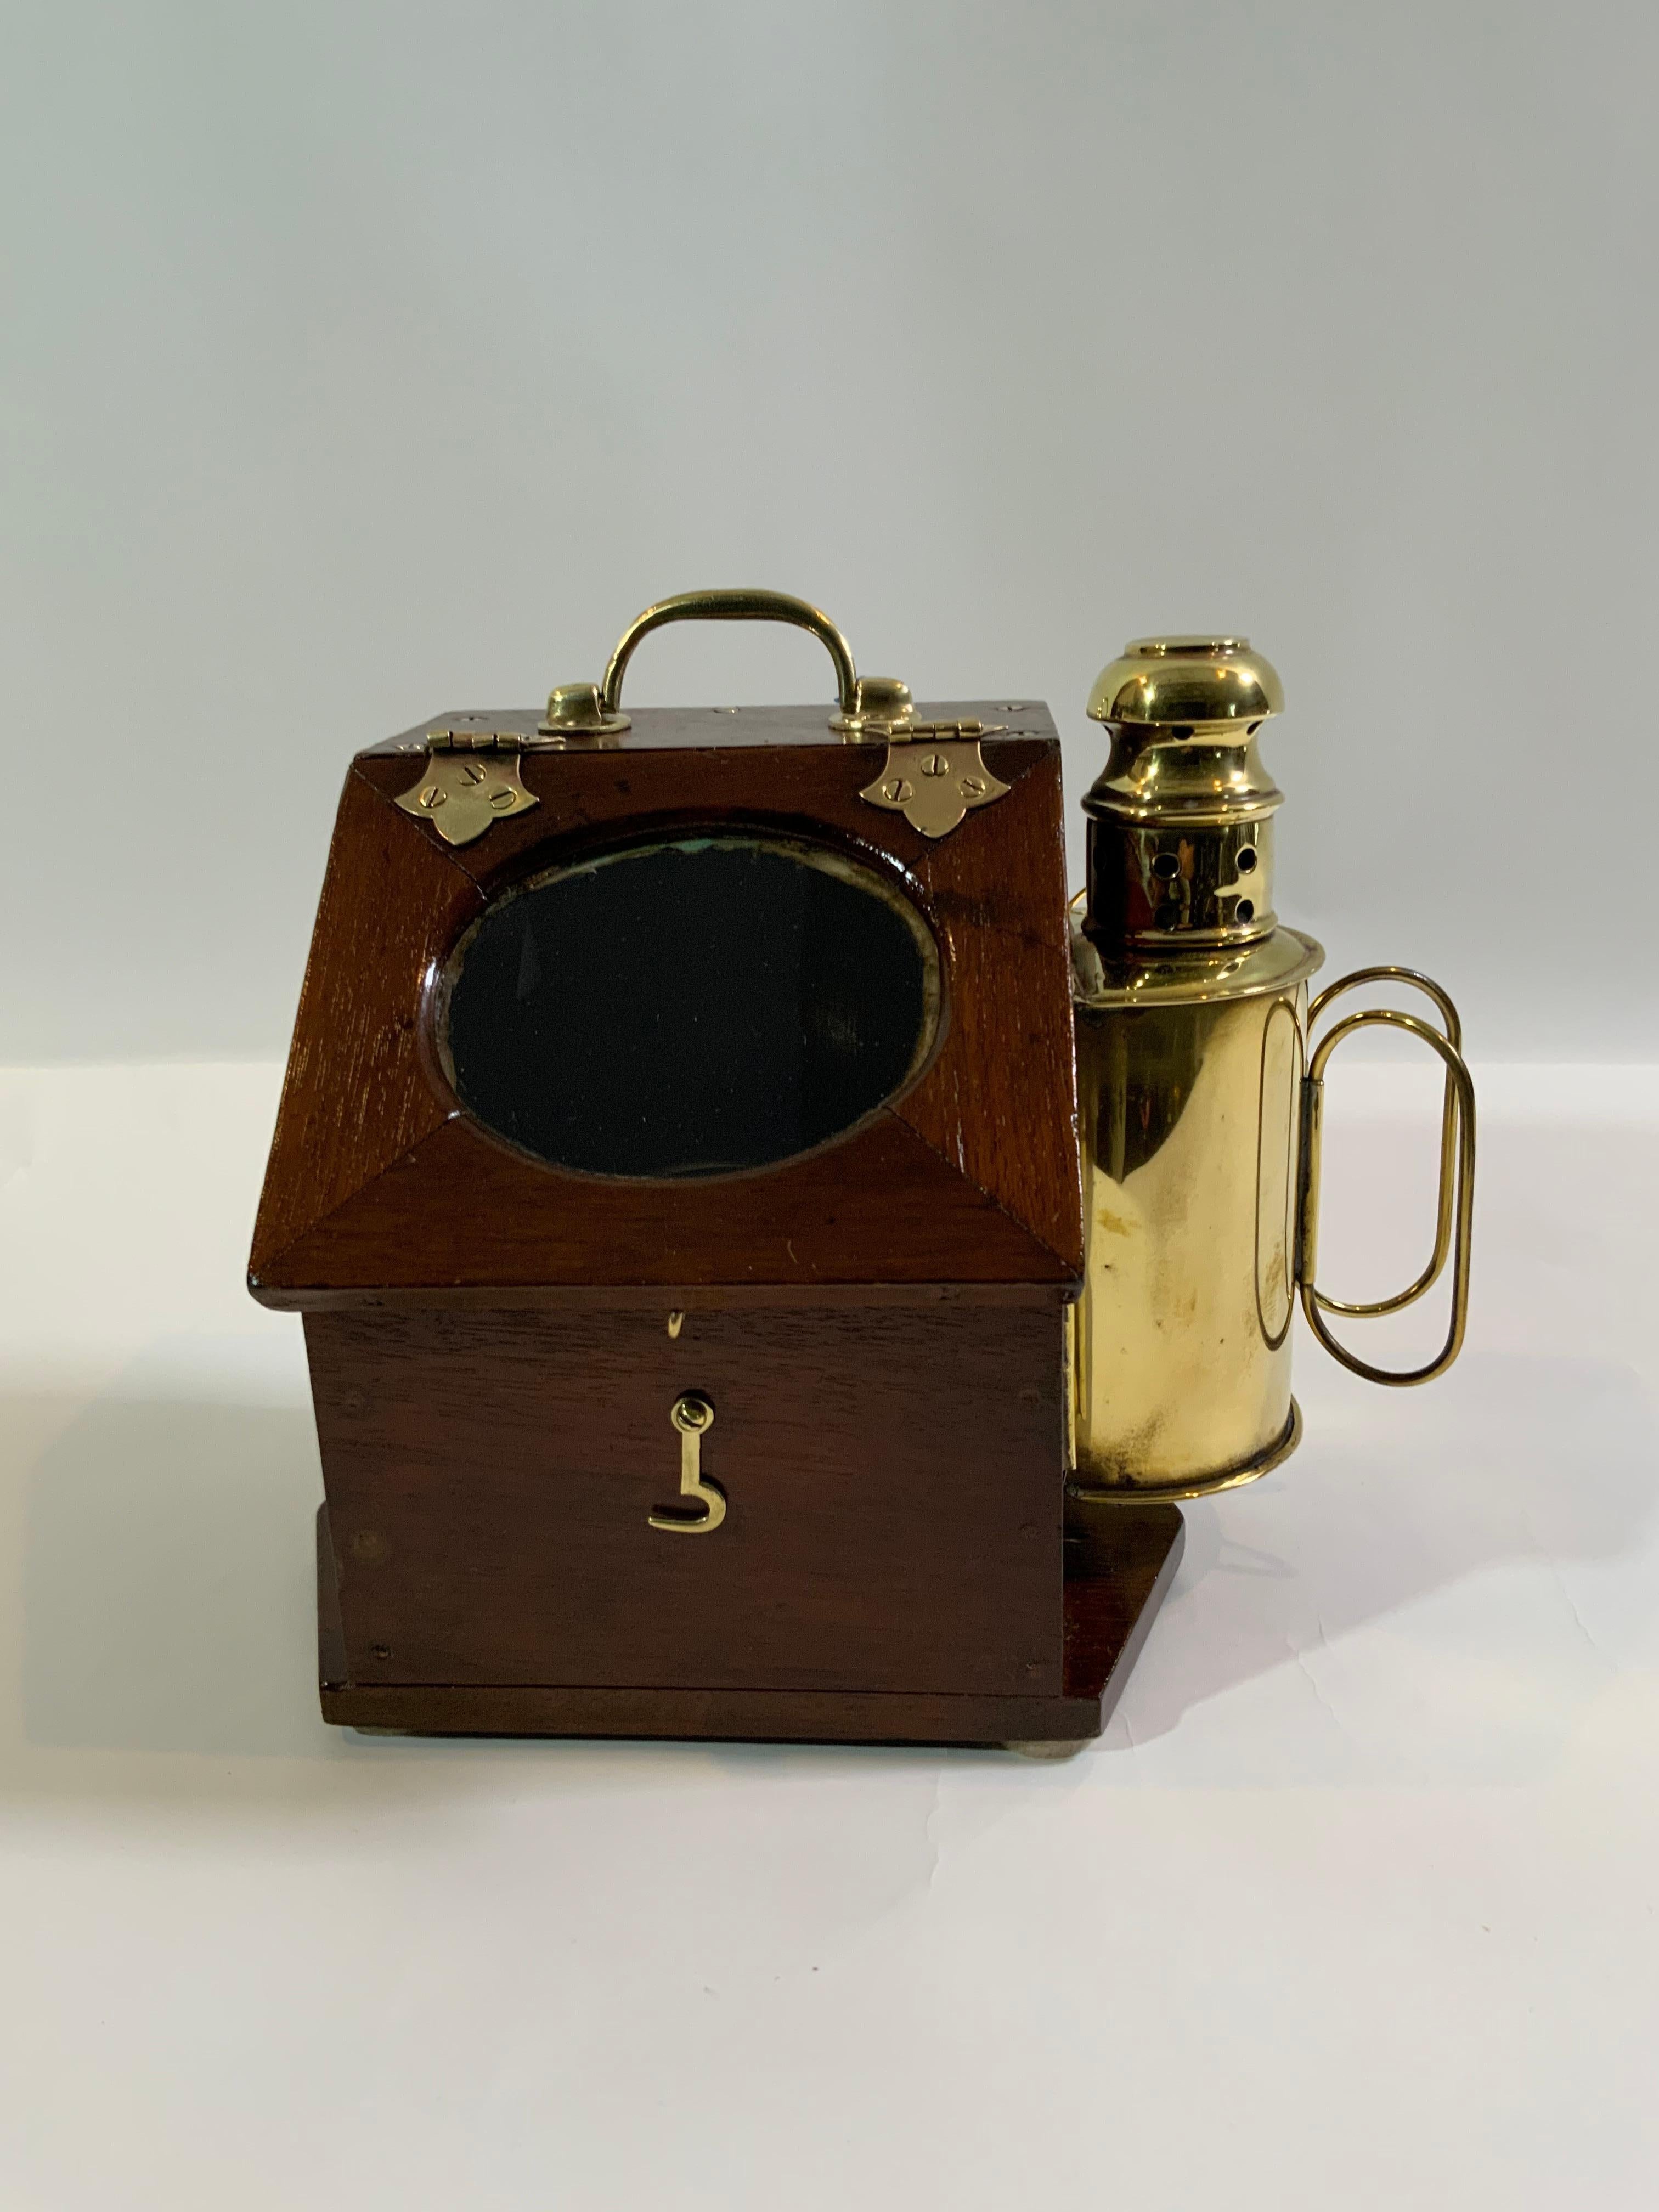 Boat compass in binnacle with hinged lid, sidelight, brass hook, etc. Very fine condition. Gimballed compass is by Polaris. Great piece.

Overall dimensions: 11